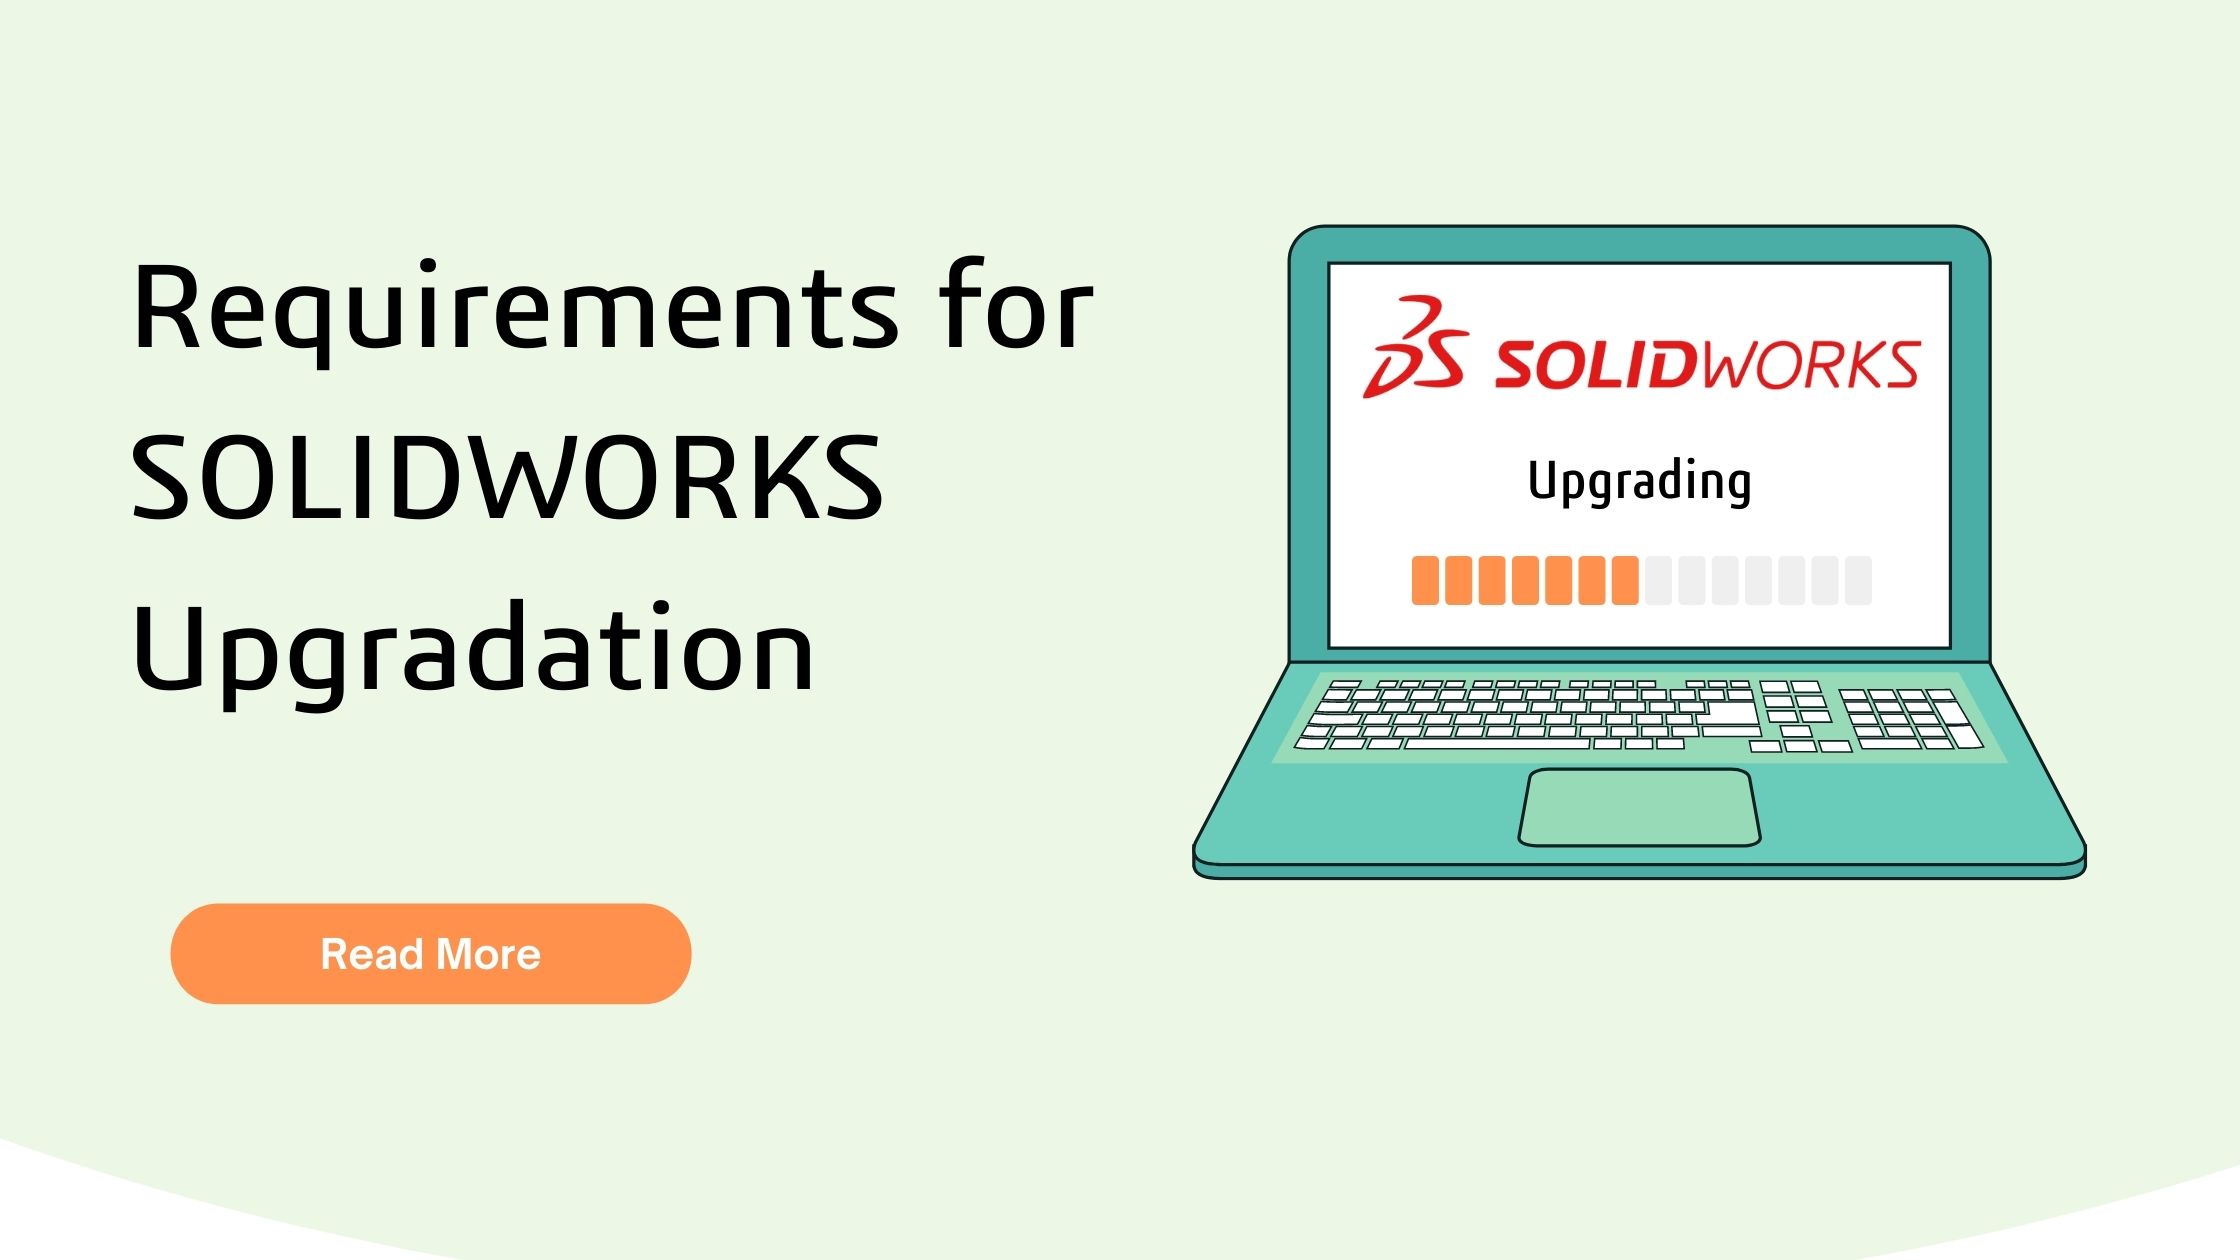 Requirements for SOLIDWORKS Upgradation